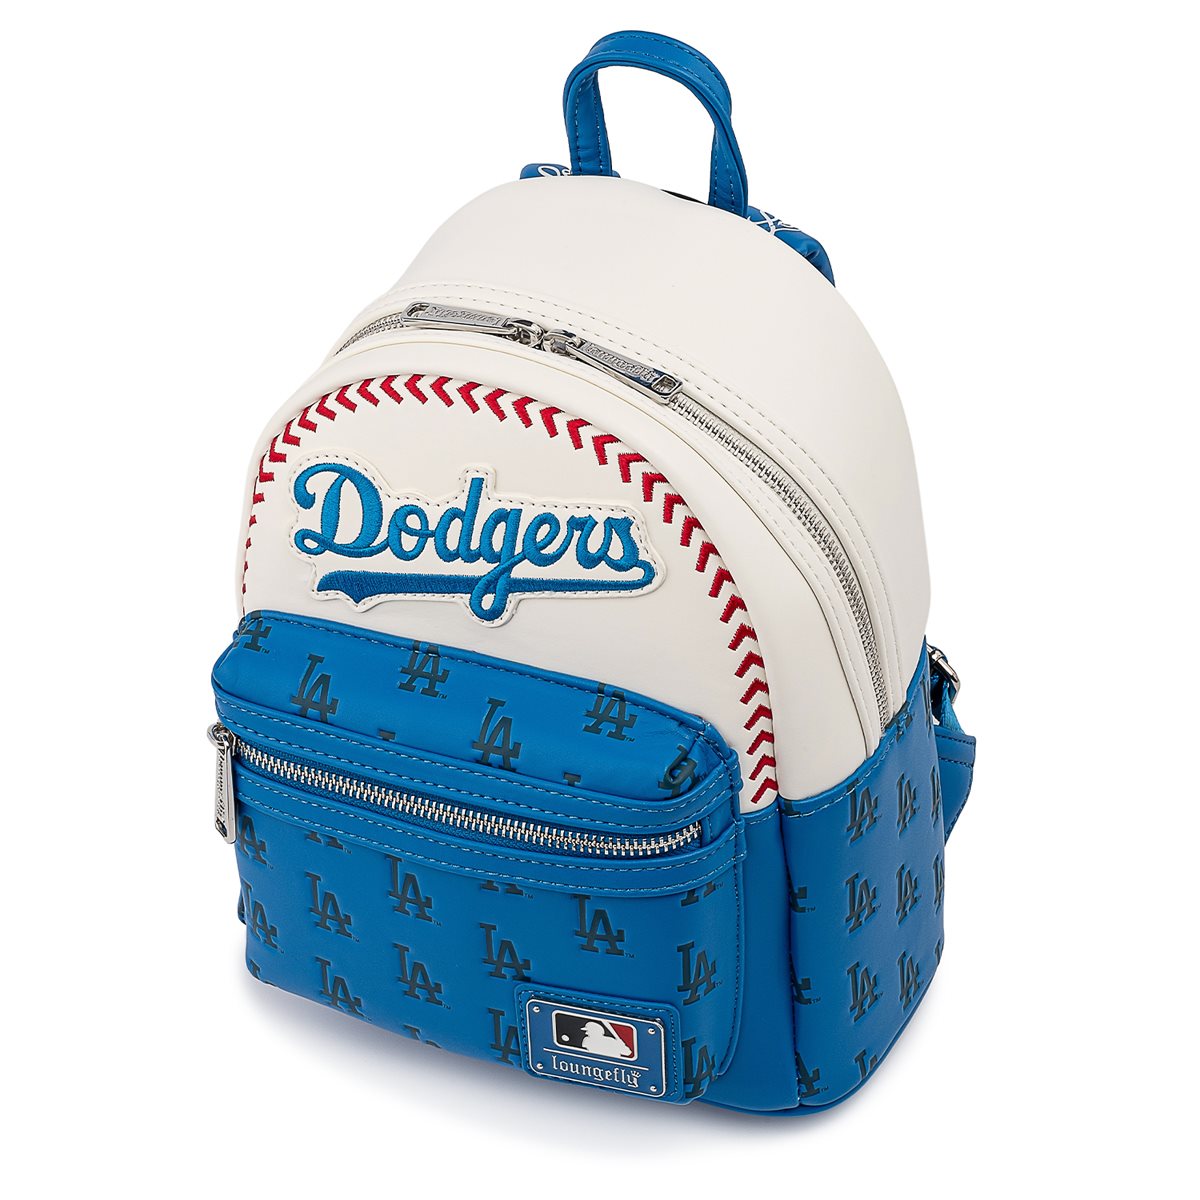 LA Dodgers Stadium Crossbody Bag with Pouch by Loungefly